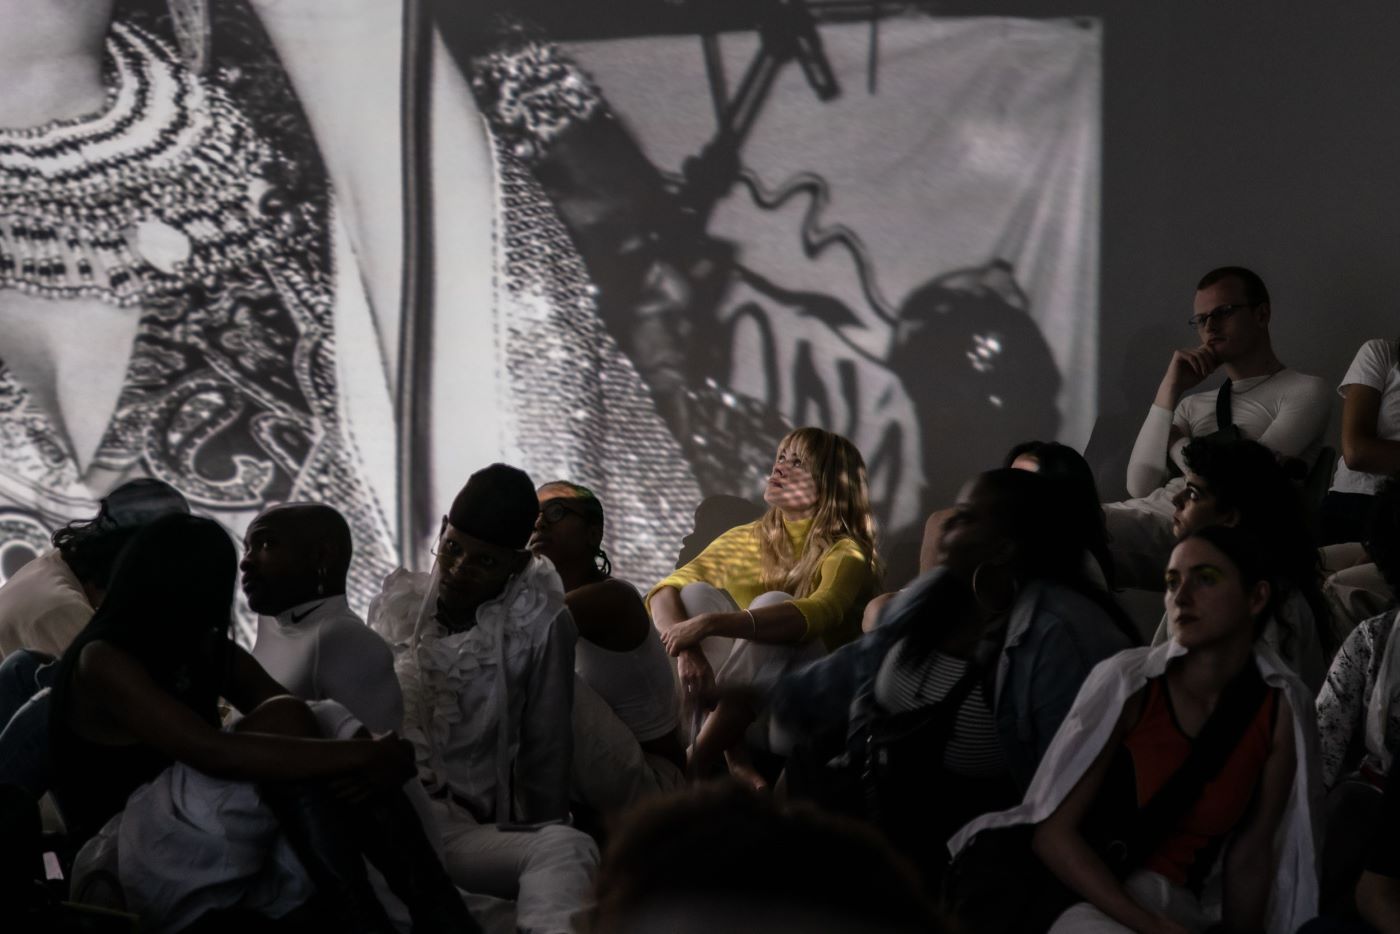 People sitting down in a dark room. There are white light projections on the walls. A woman in yellow is being illuminated by the projections.